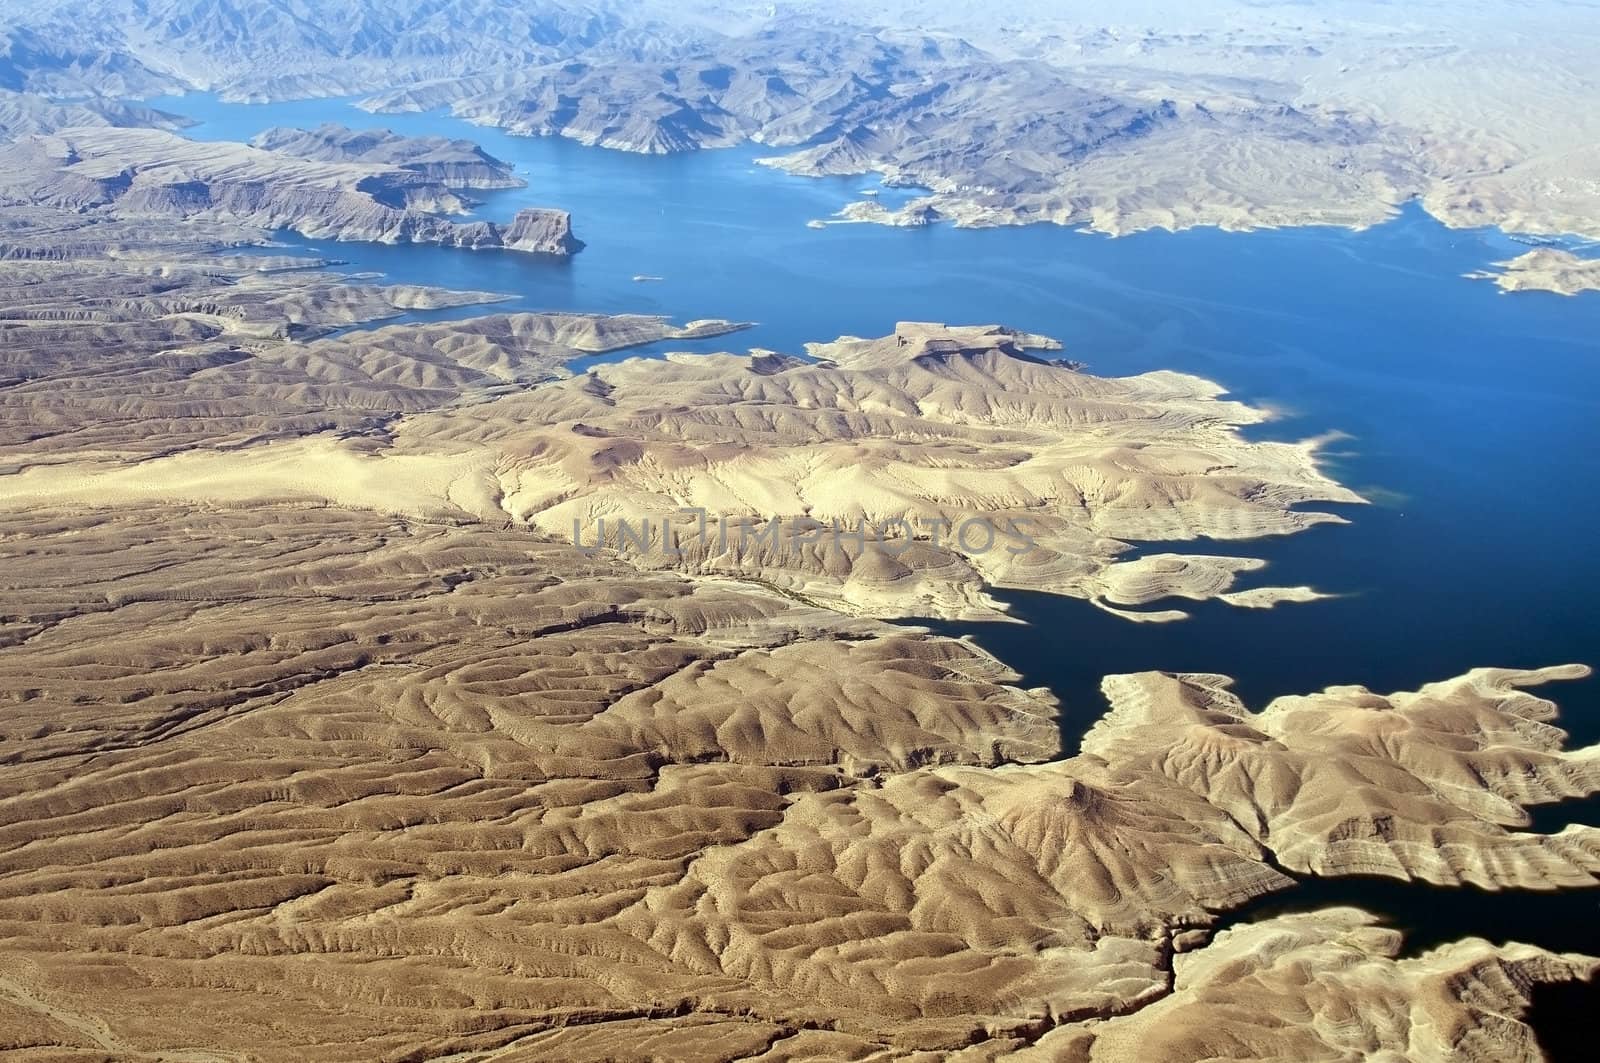 Aerial view of Colorado River and Lake Mead by irisphoto4